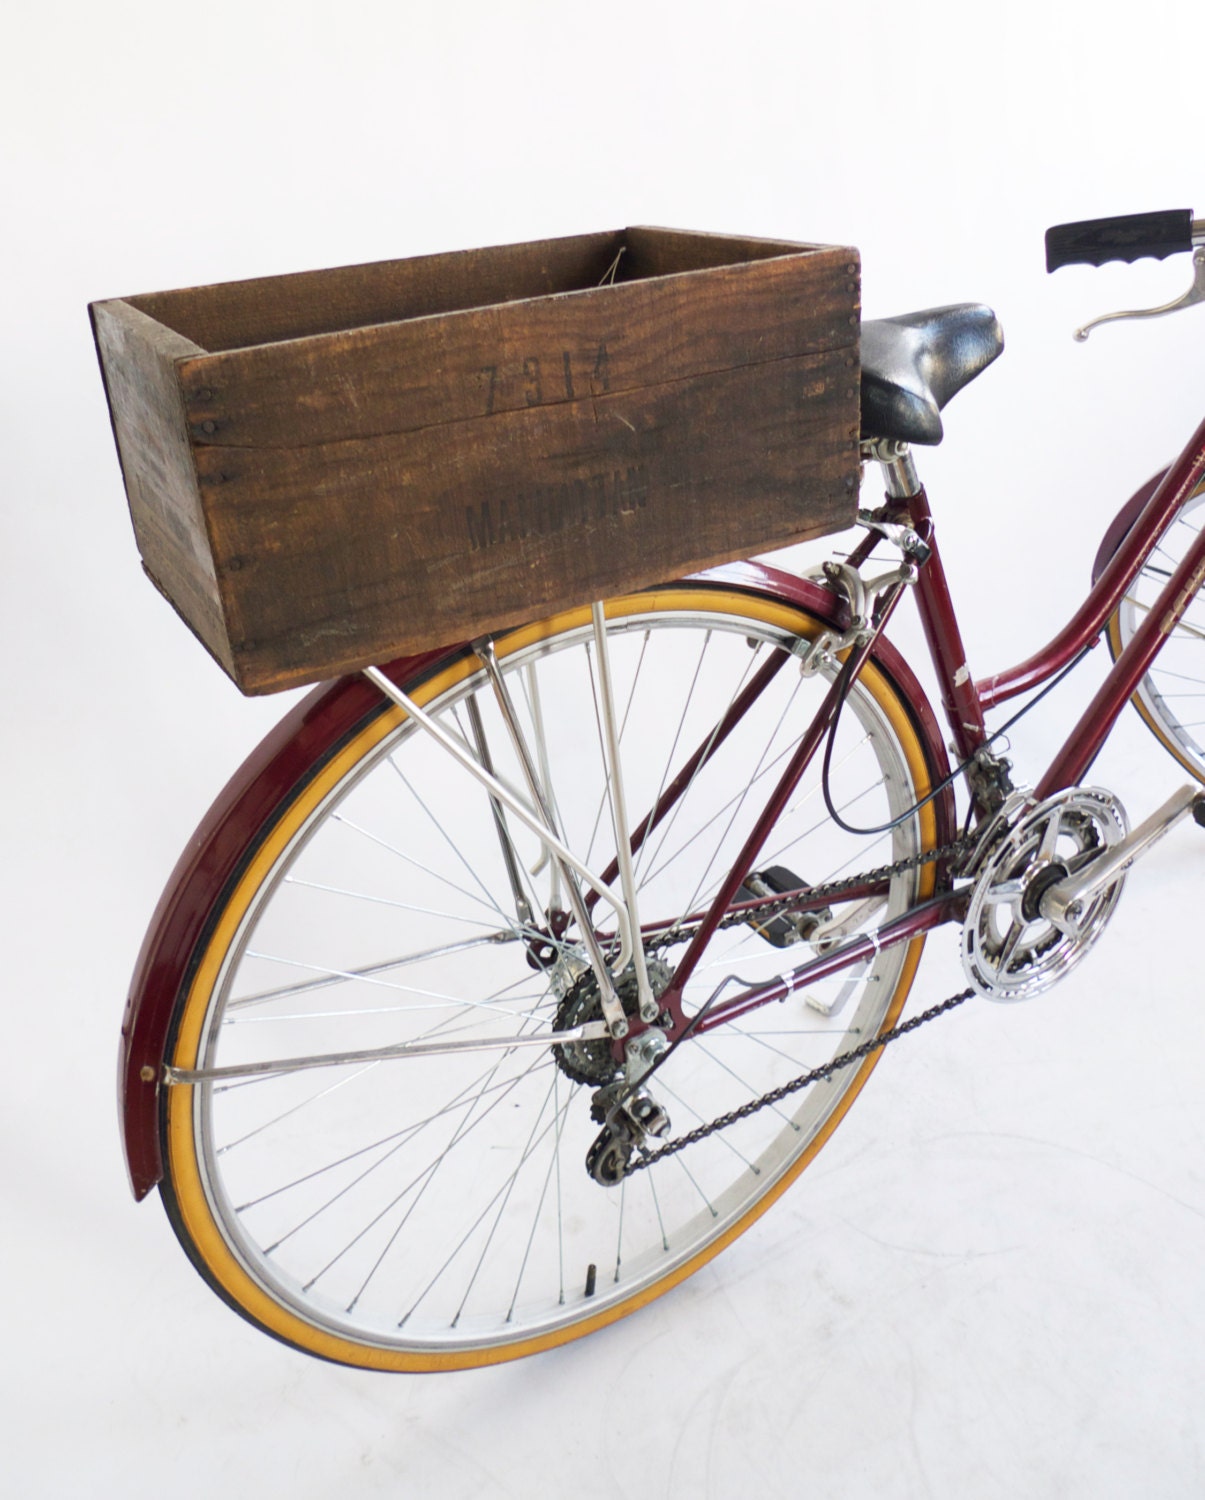 Bicycle Crate Upcycled from a Sunsweet Apricot Box - EleanorsNYC